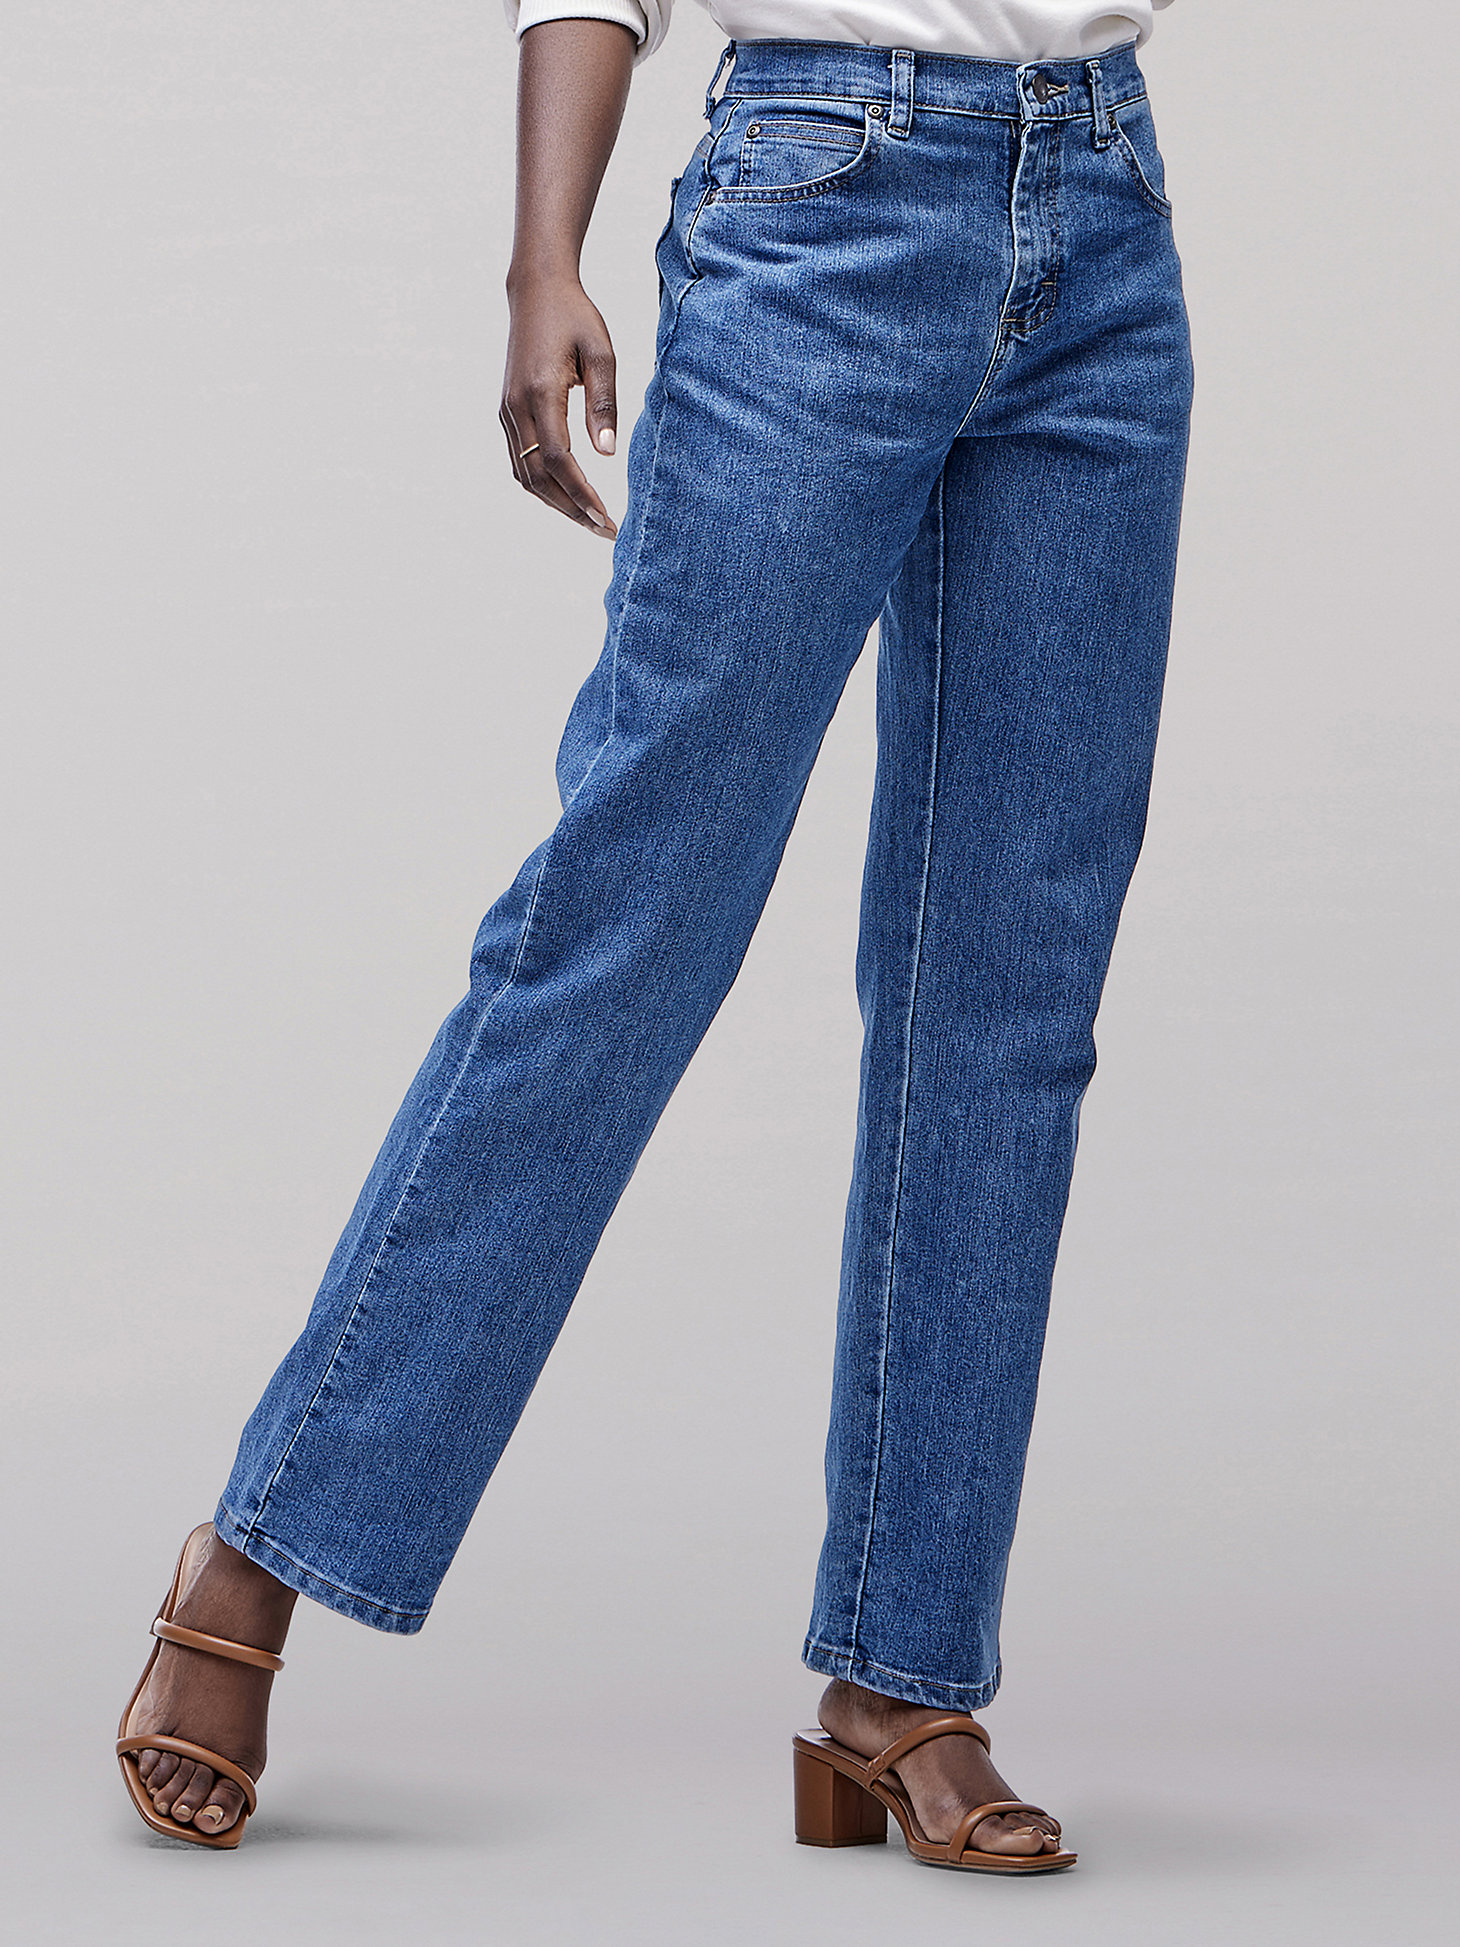 Women’s Original Relaxed Fit Straight Leg Jeans in Premium Light main view